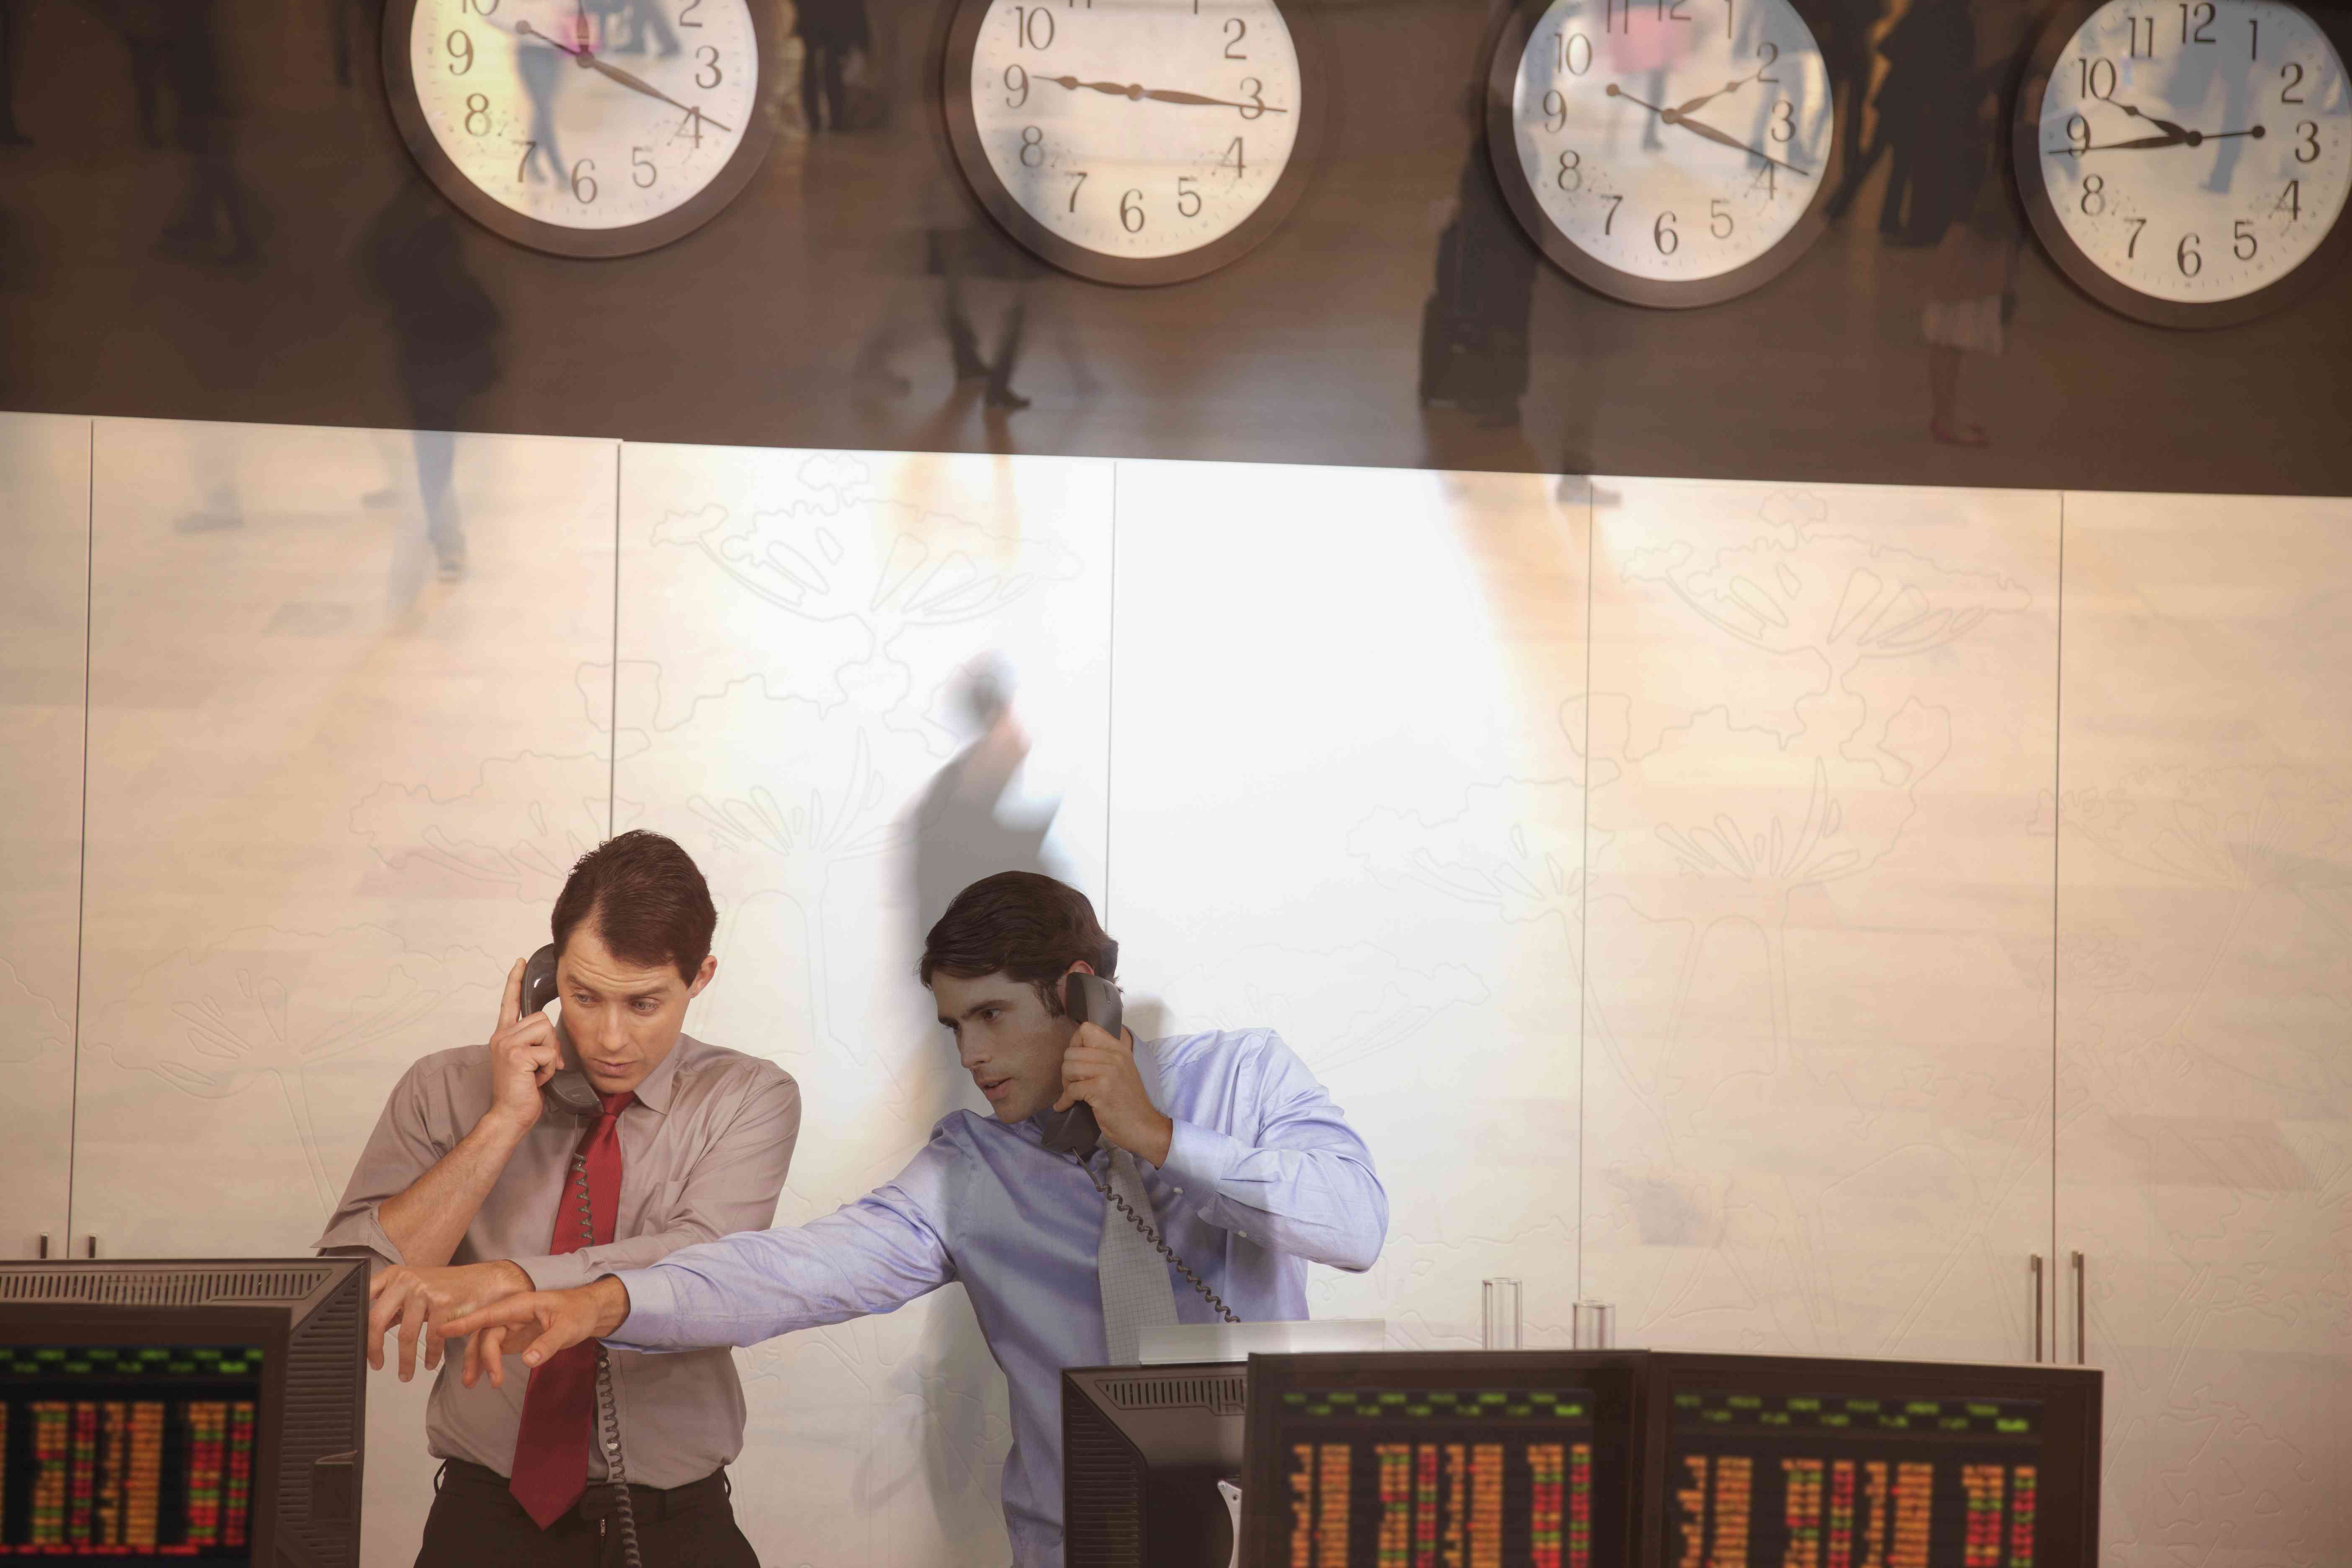 Two derivative traders stand behind trading consoles and take trade orders on the phone while above them a series of clocks display the time in different time zones.